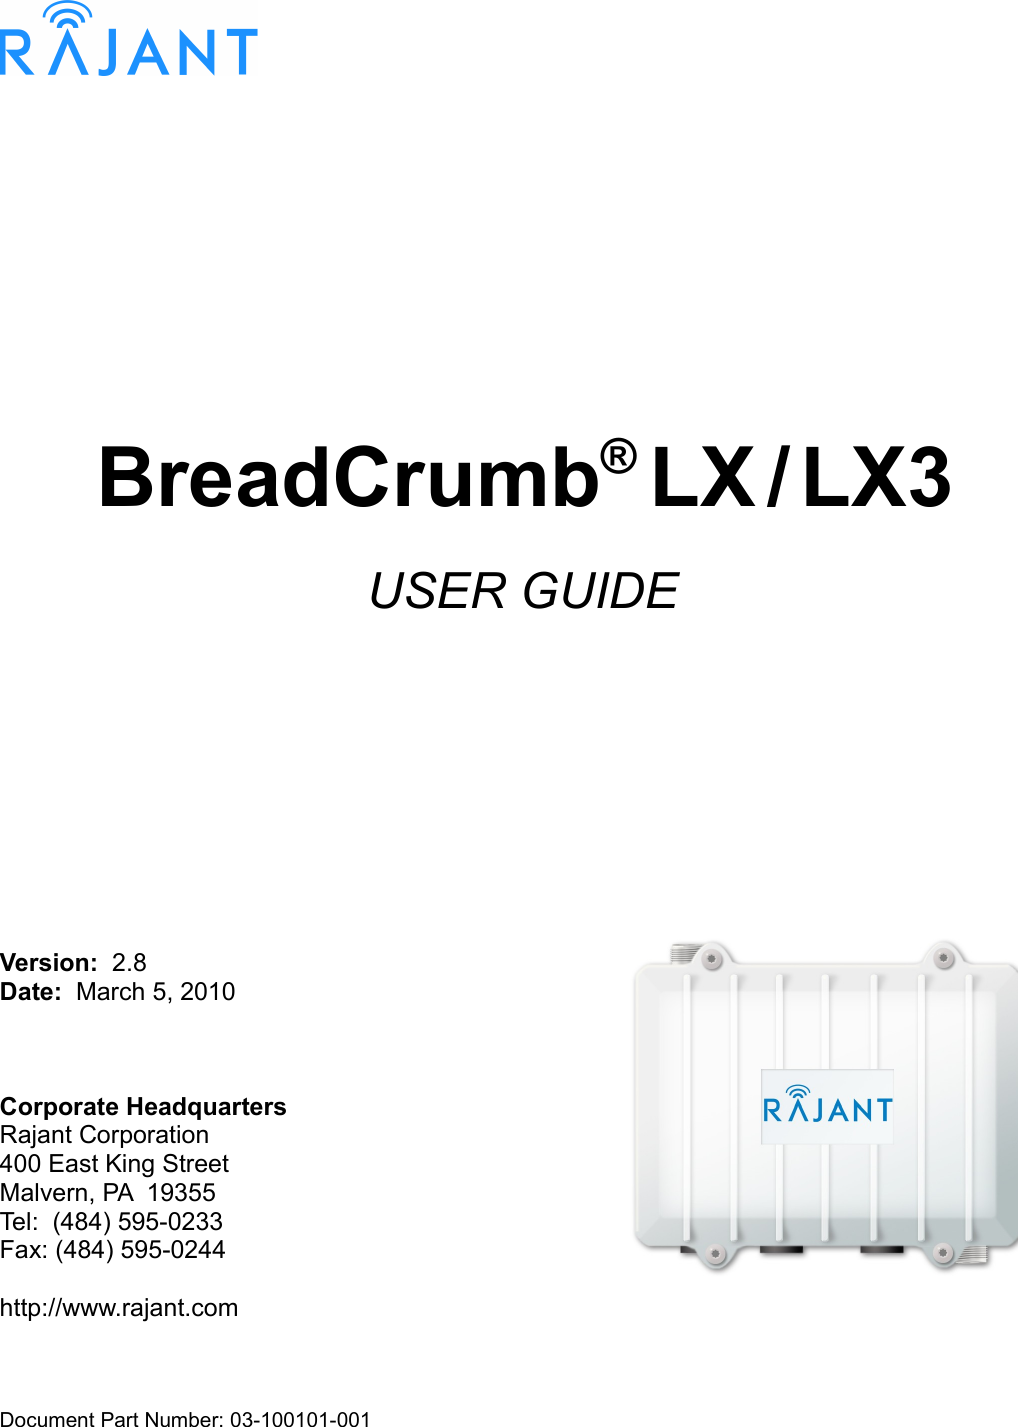 BreadCrumb® LX / LX3USER GUIDEVersion:  2.8Date:  March 5, 2010Corporate HeadquartersRajant Corporation400 East King StreetMalvern, PA  19355Tel:  (484) 595-0233Fax: (484) 595-0244http://www.rajant.comDocument Part Number: 03-100101-001